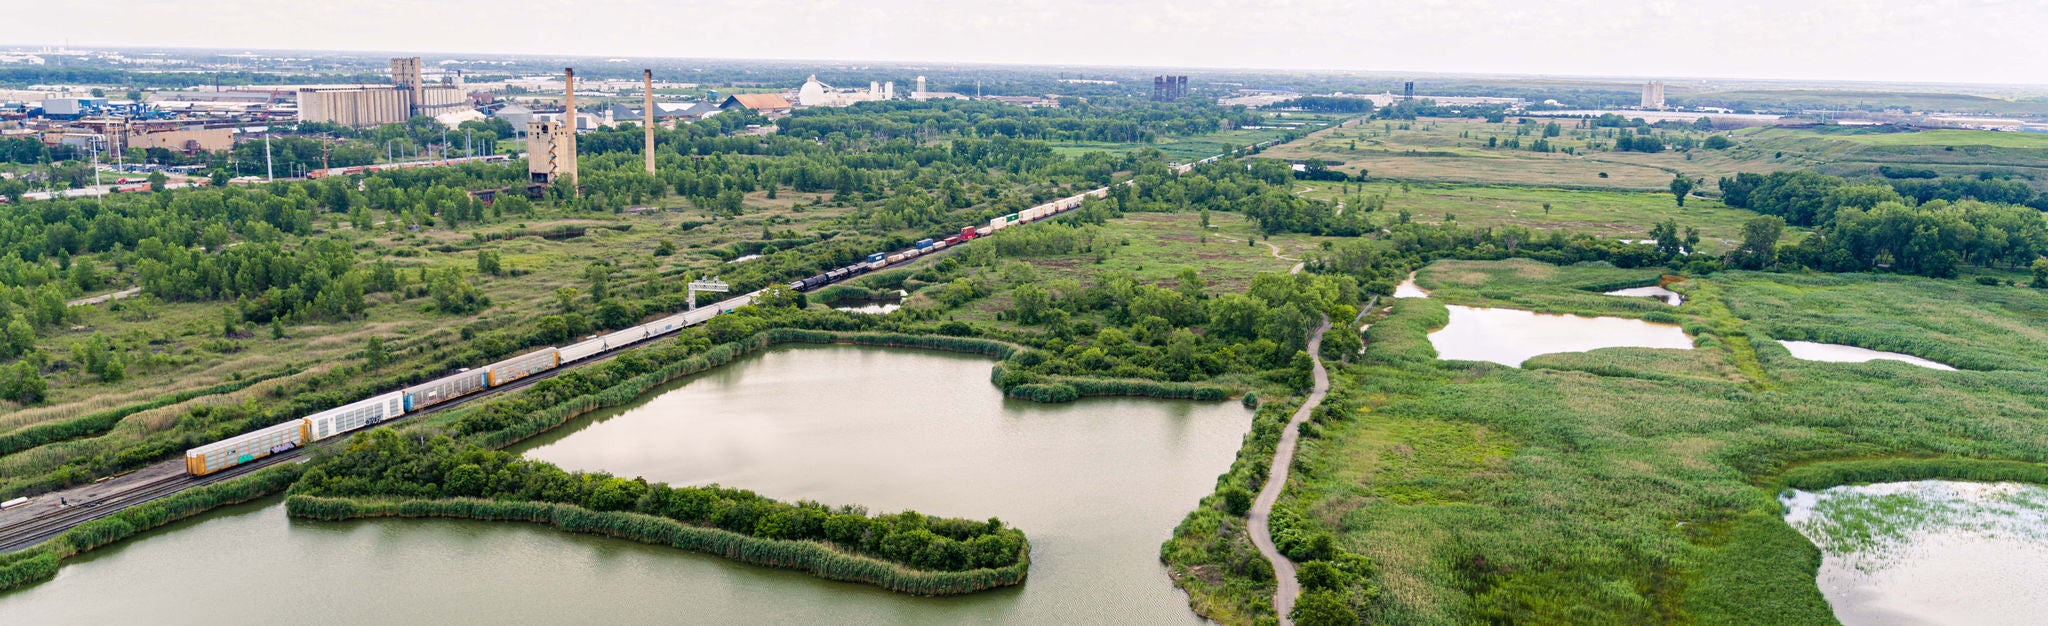 Aerial of water next to a train track with a city in the background, prime industrial development spot